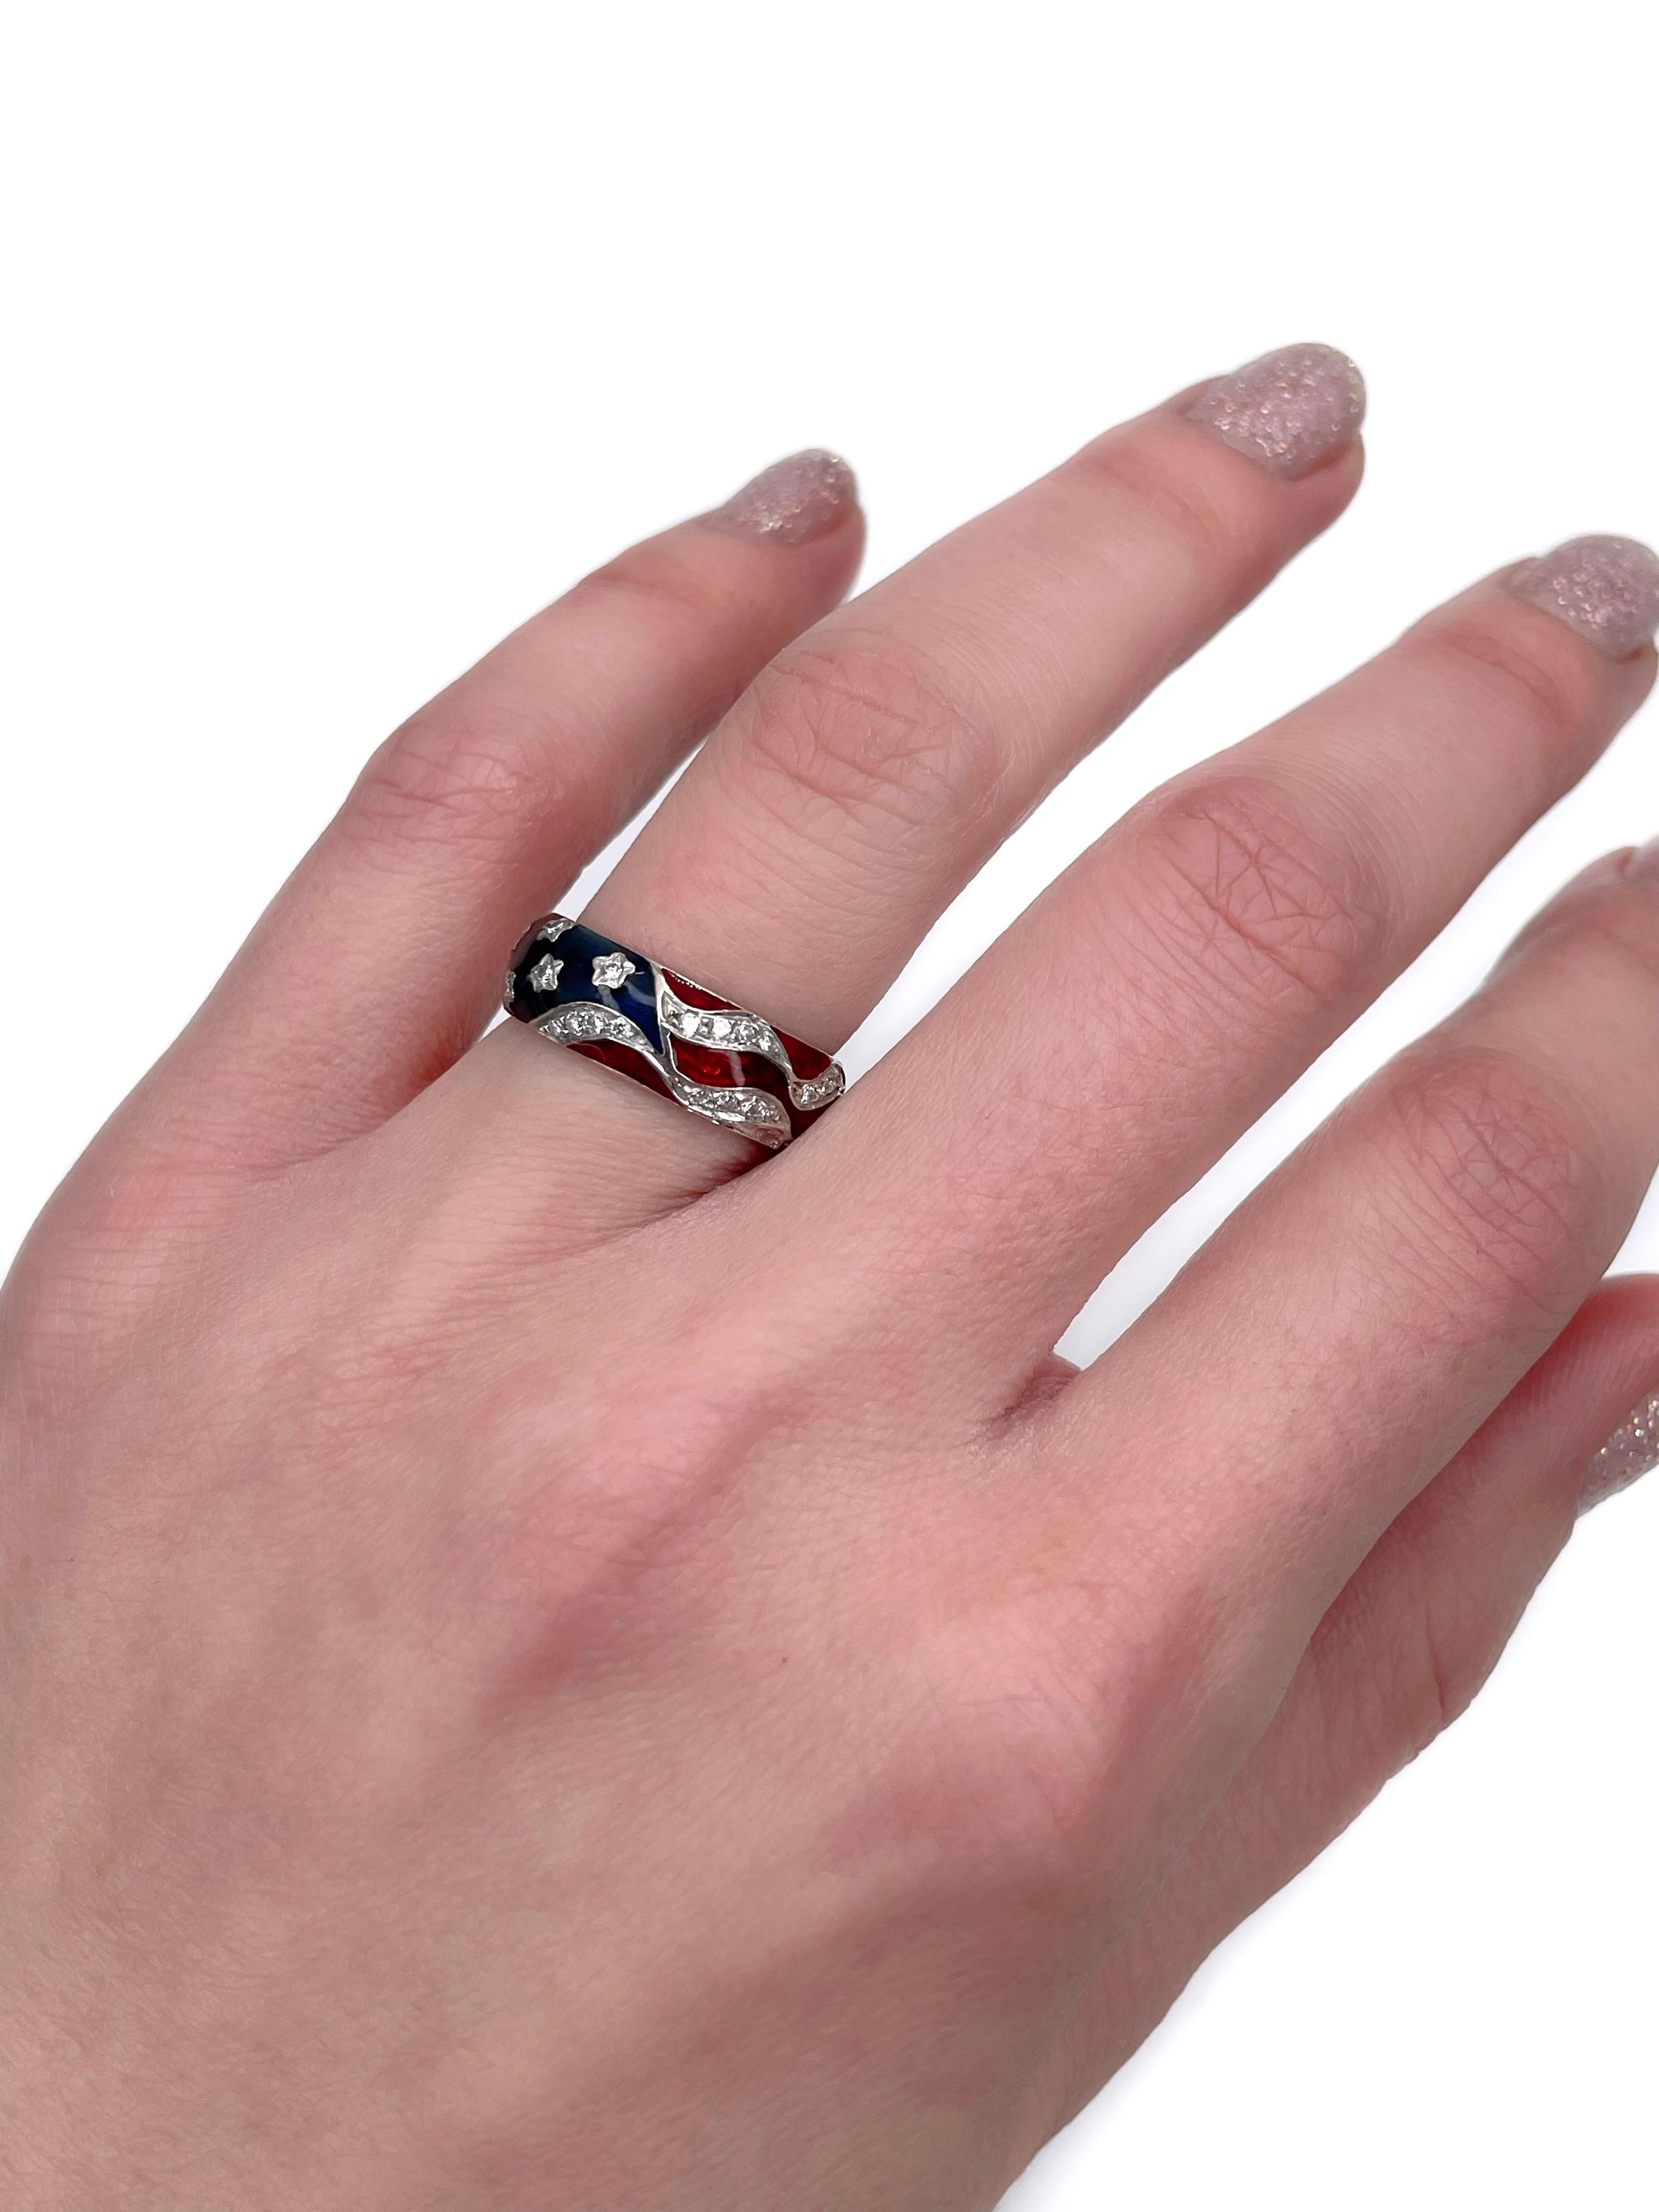 This is a vintage United States flag band ring designed by Hidalgo in 1990s. The piece is crafted in 18K white gold. It features diamonds, blue and red enamel. 

Signed “750 Hidalgo” on the shank. 

Weight: 4.18g 
Size: 16.5 (US 6)

IMPORTANT: